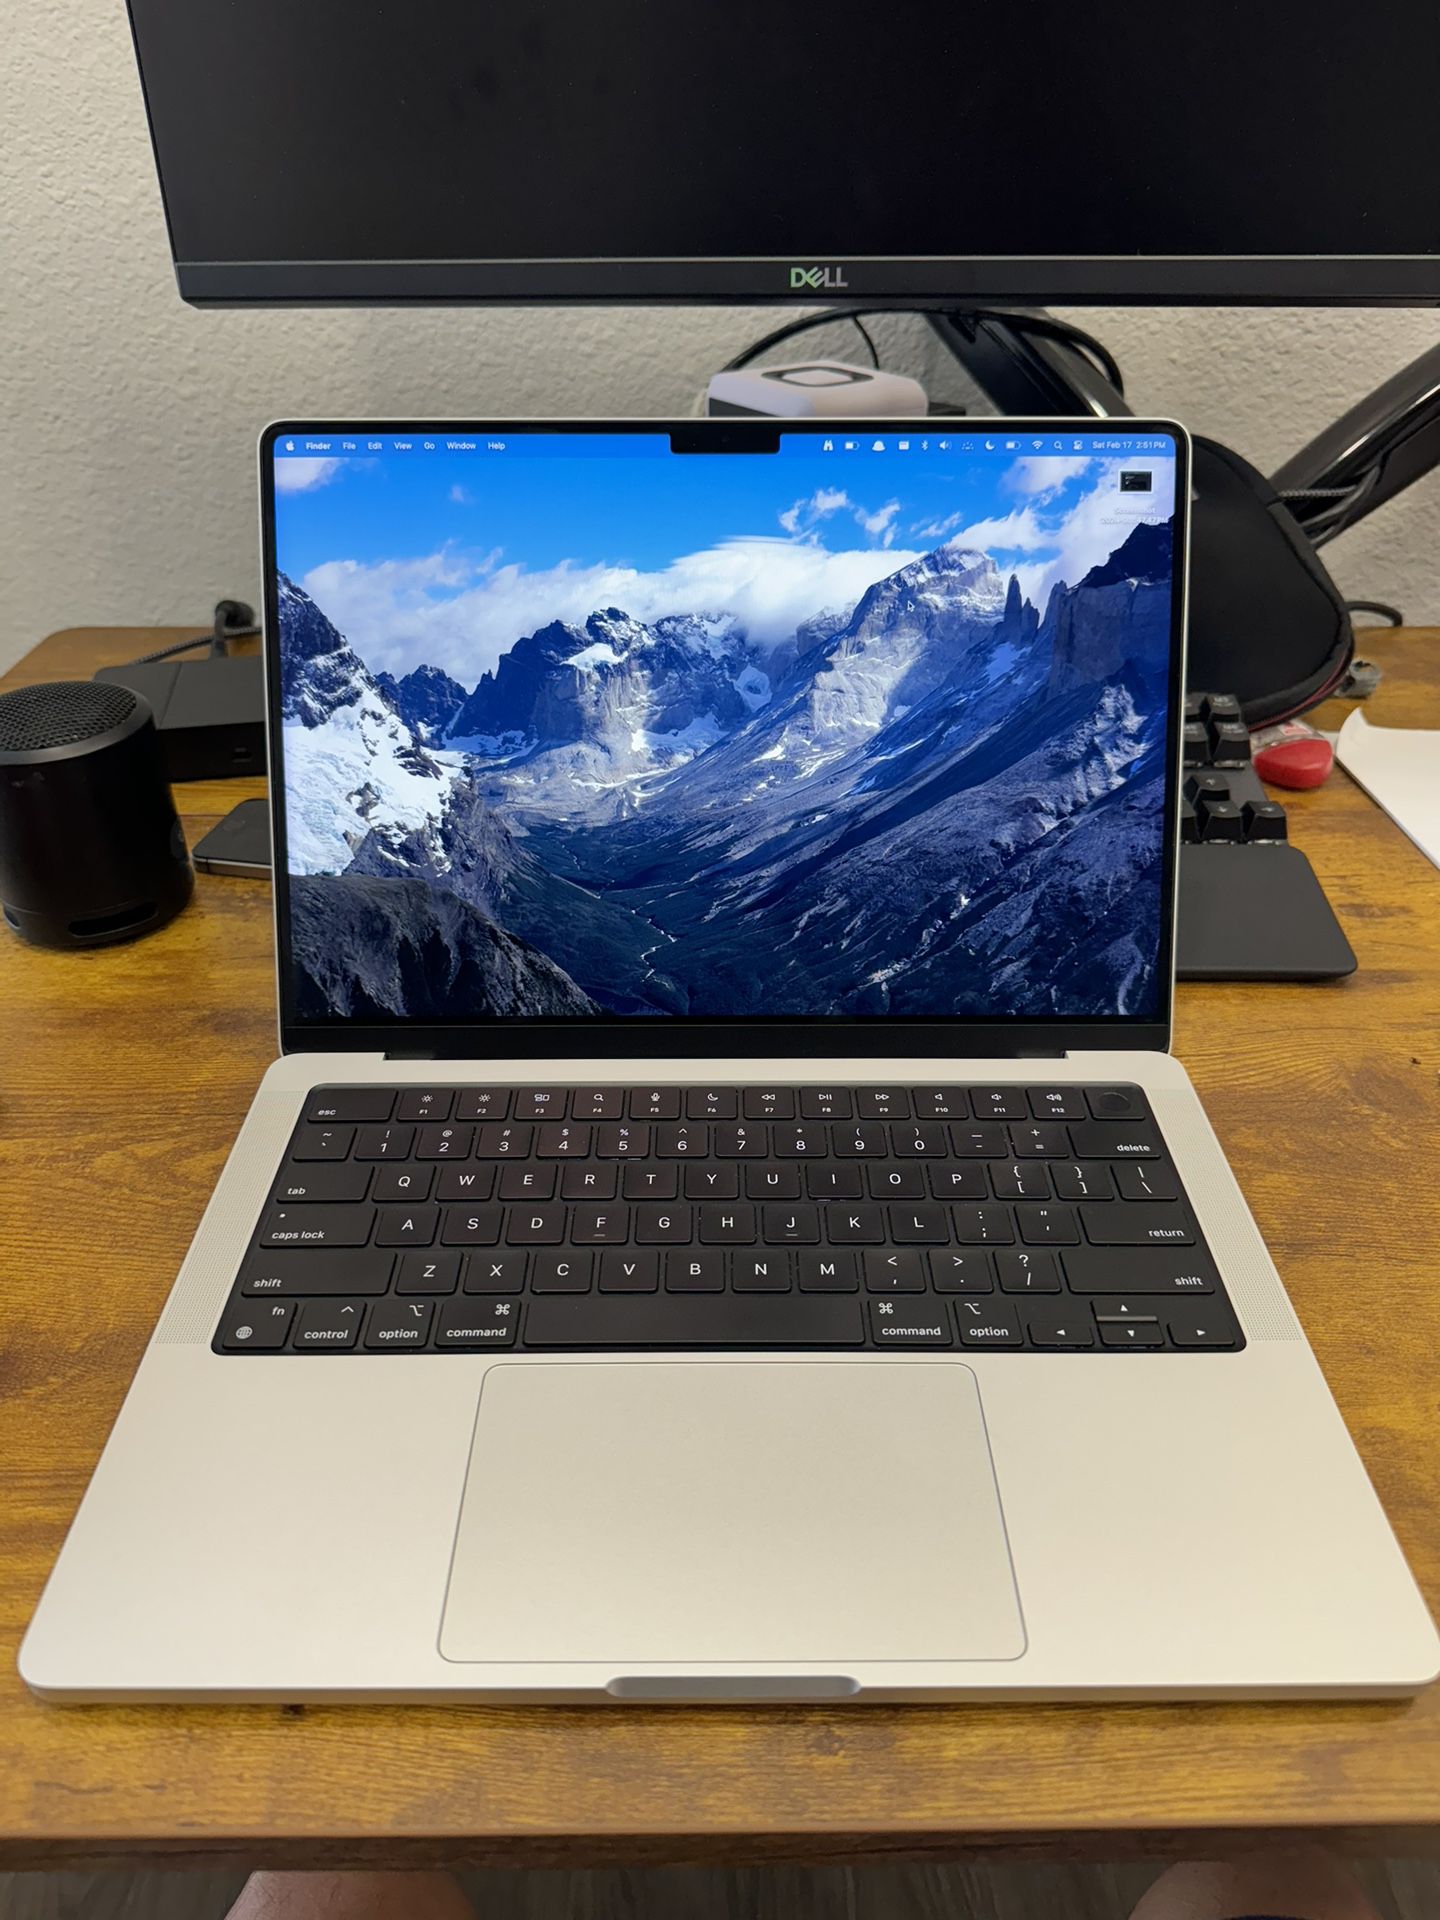 MacBook Pro 14" M1 Pro | 16GB RAM, 512GB Storage | Includes AppleCare+ | Low Cycle Count